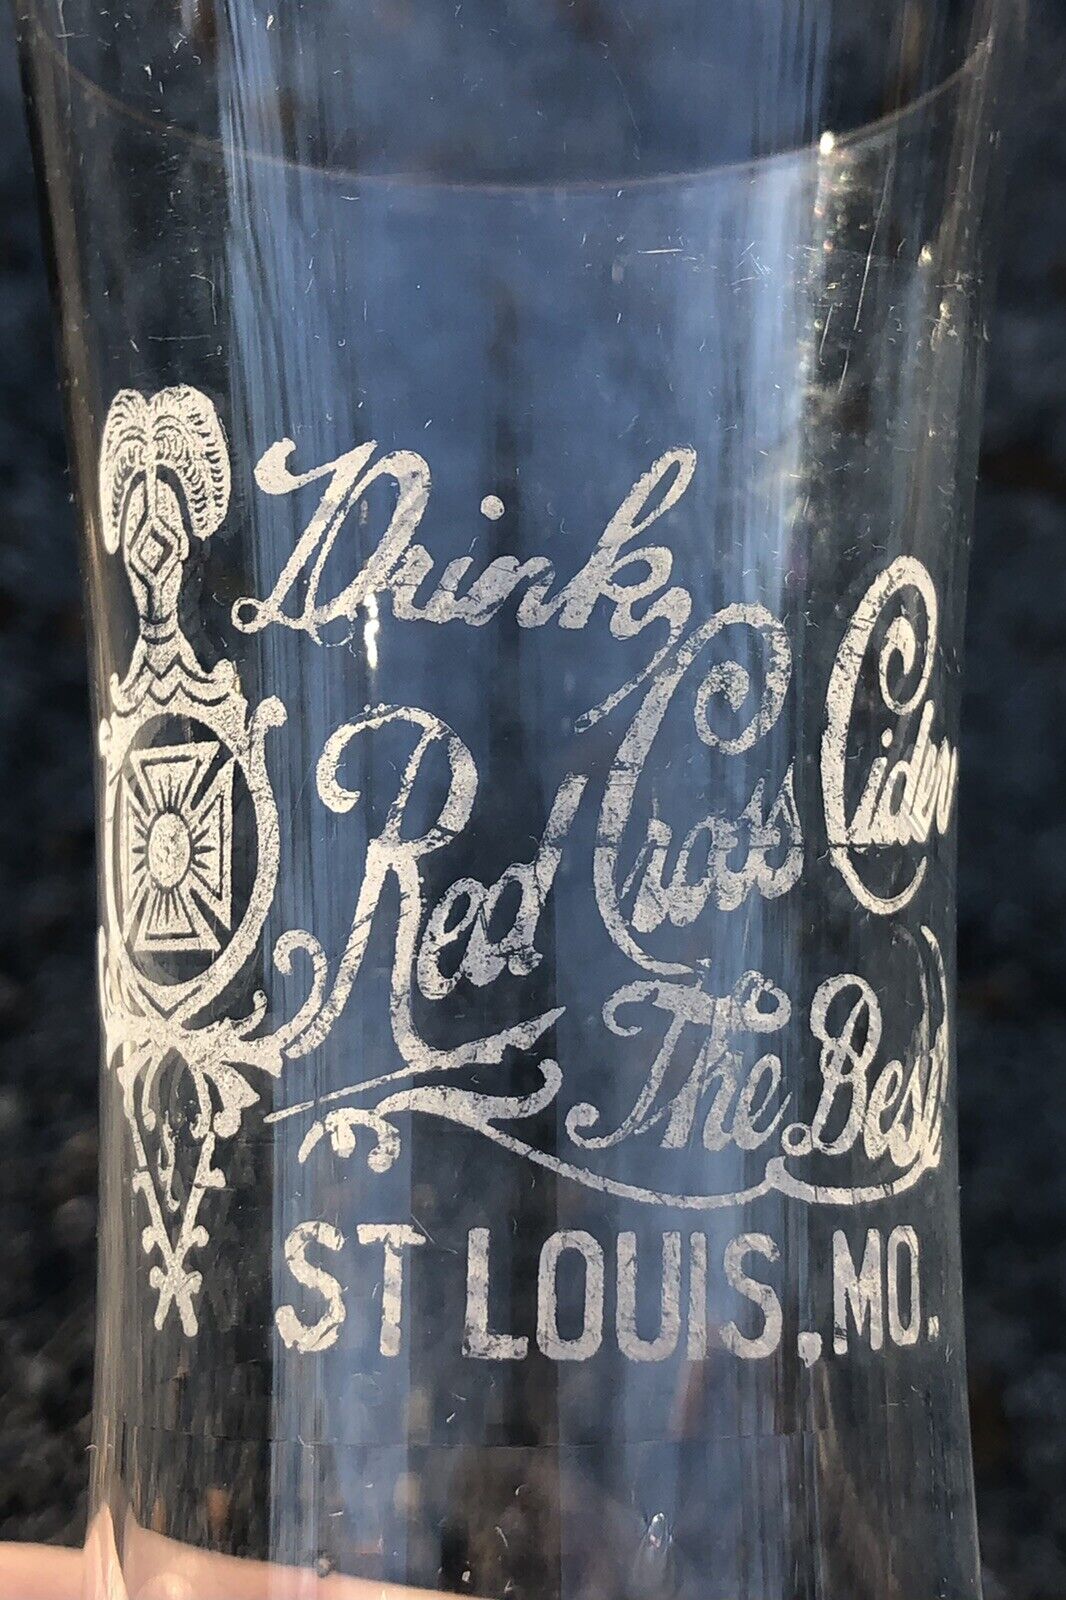 Rare Antique Drink Red Cross Cider Pre Prohibition Drinking Glass - St Louis, Mo